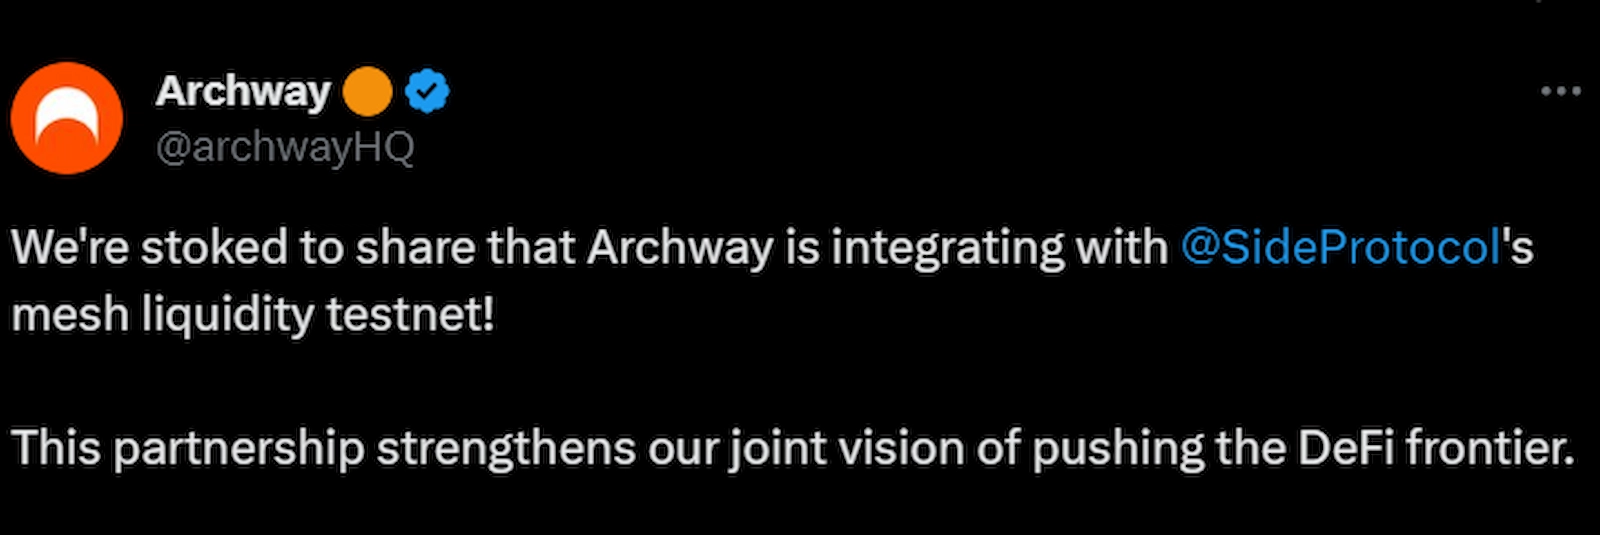 Archway announced a partnership with Side Protocol